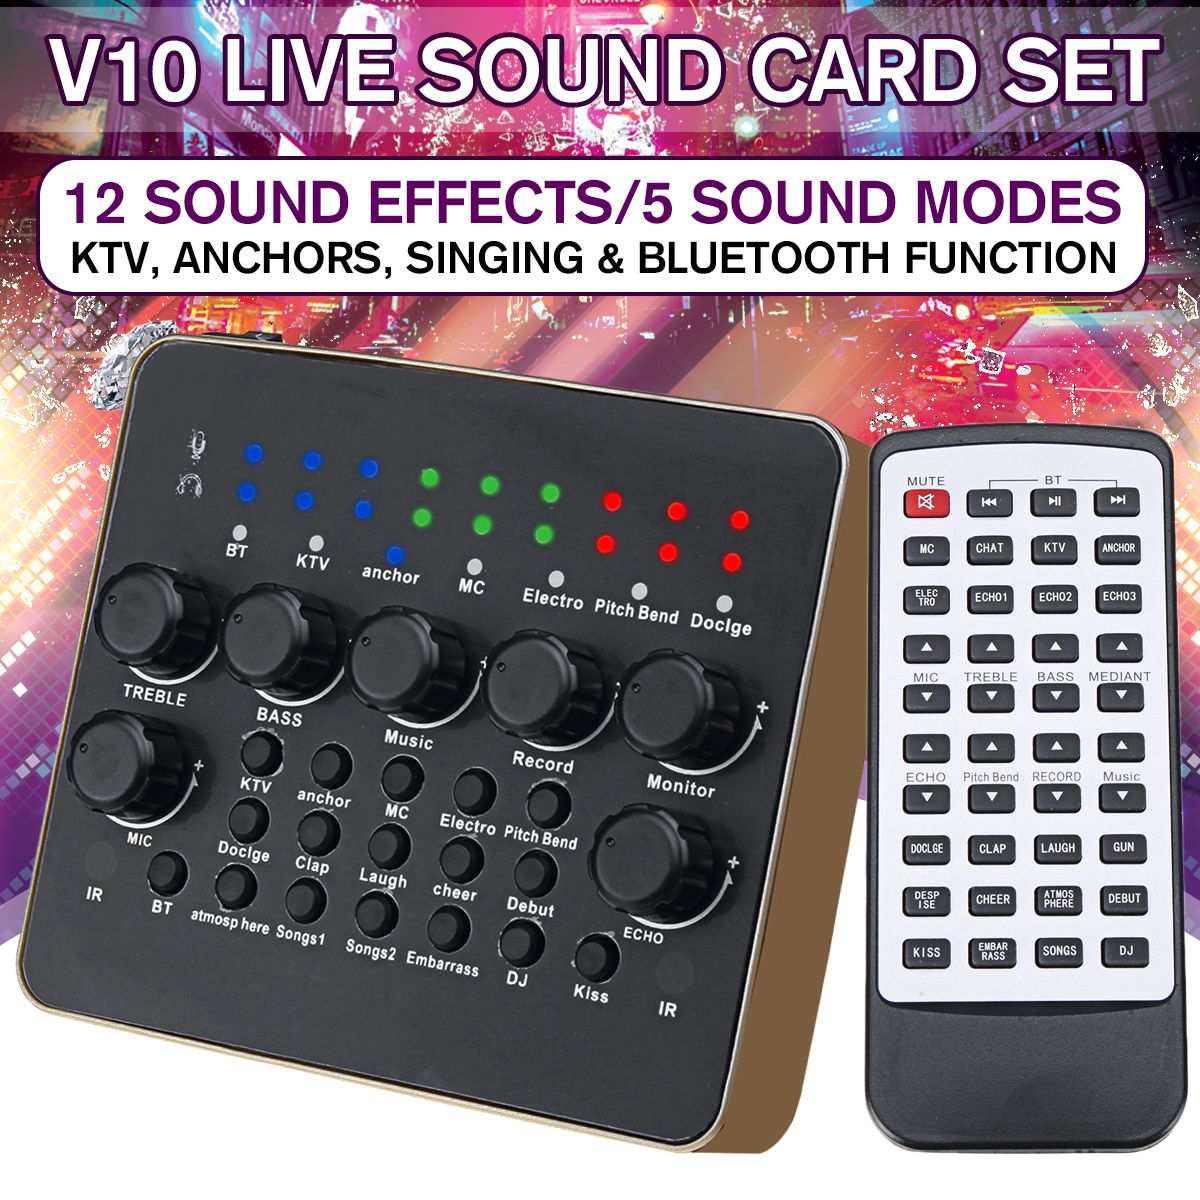 V10-Live-Sound-Card-Microphone-Set-device-Mobile-Phone-Fast-Hand-Shouting-Wheat-Universal-for-Mobile-1539903